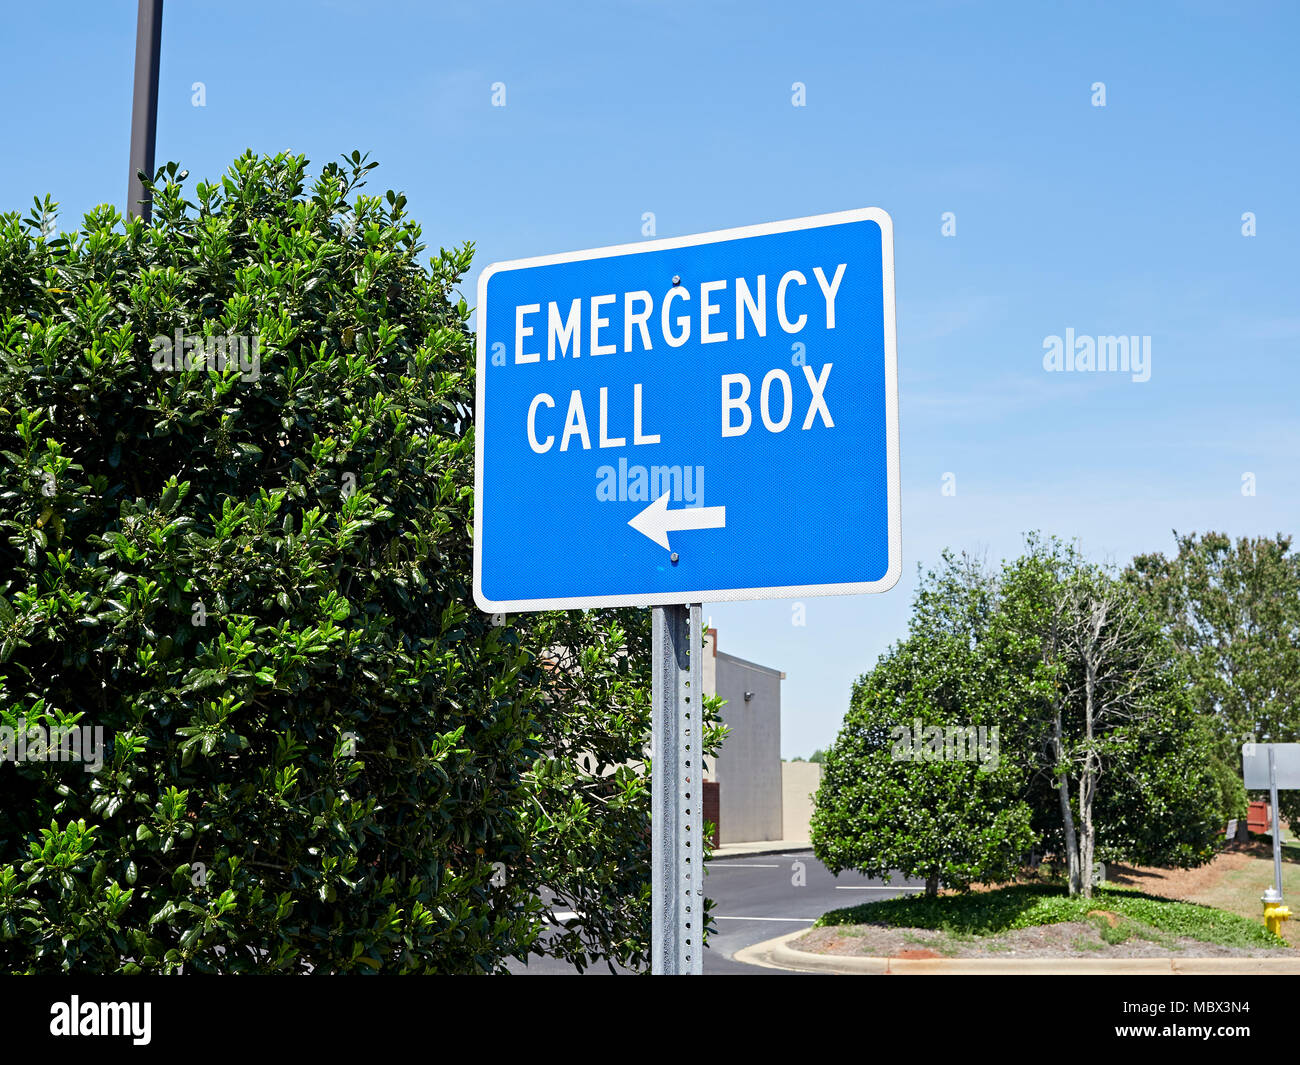 Emergency call box sign pointing in the direction of a communication box that notifies a 911 operator of trouble or an emergency in Alabama USA. Stock Photo